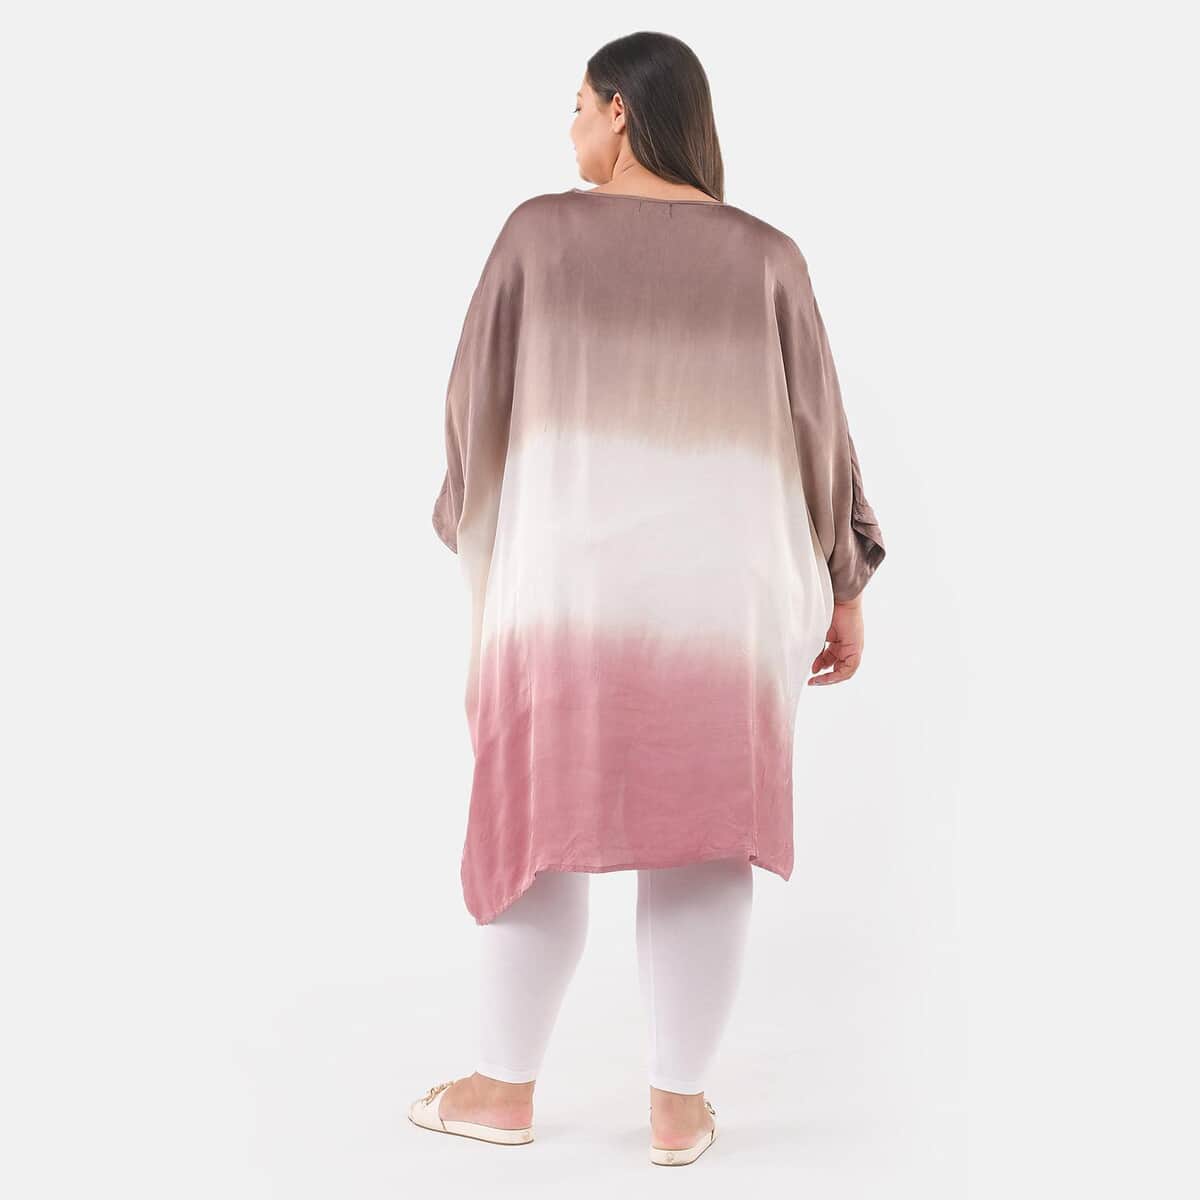 Tamsy Brown Ombre Dye V-Neck with Lace Tunic - One Size fits Most image number 1